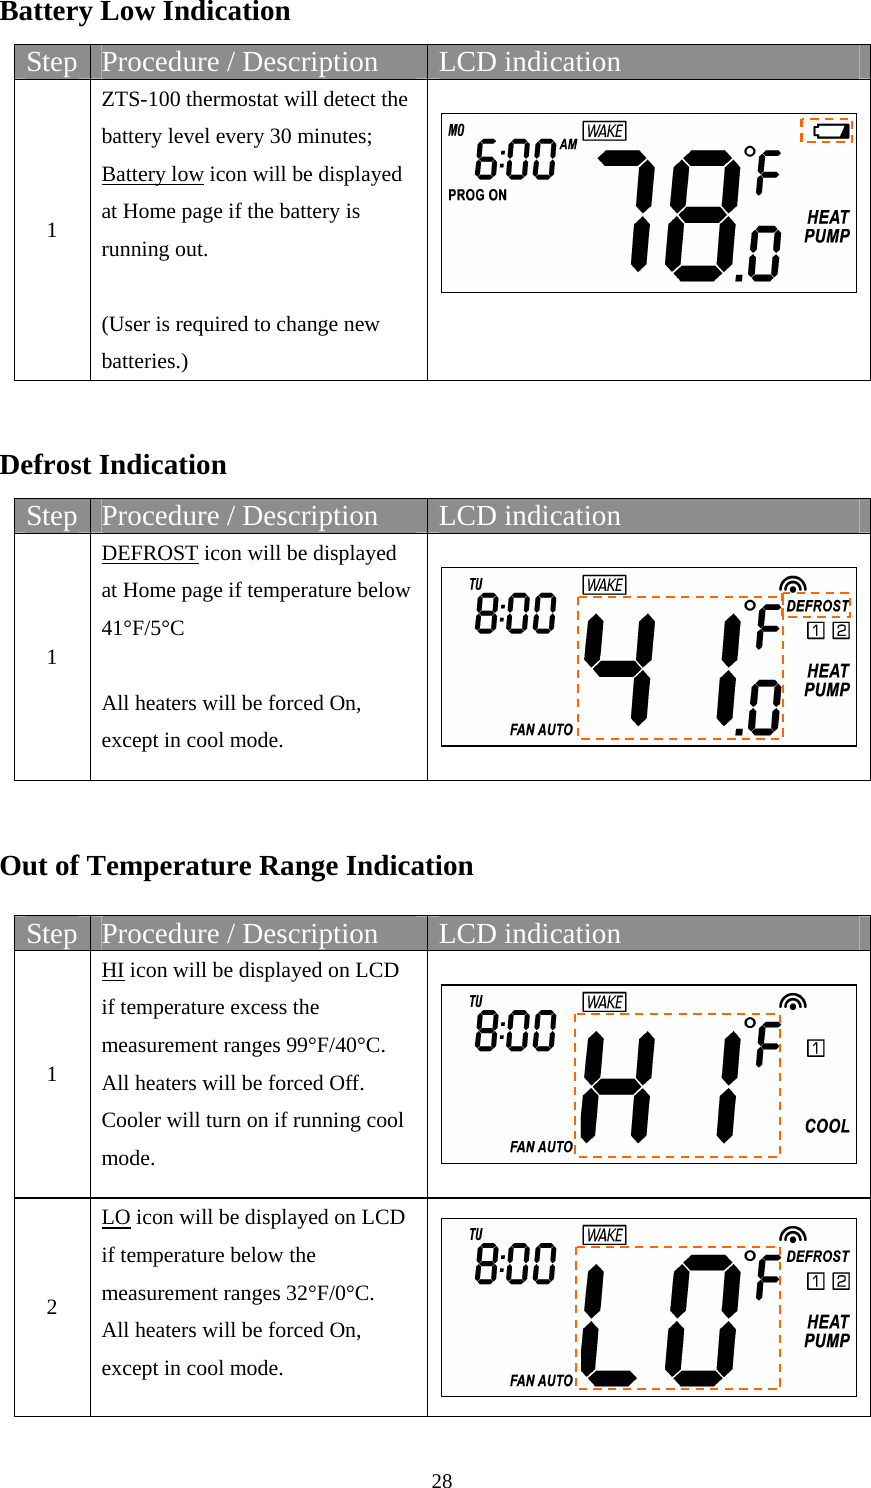 28  Battery Low Indication  Step  Procedure / Description  LCD indication 1 ZTS-100 thermostat will detect the battery level every 30 minutes; Battery low icon will be displayed at Home page if the battery is running out.  (User is required to change new batteries.)     Defrost Indication  Step  Procedure / Description  LCD indication 1 DEFROST icon will be displayed at Home page if temperature below 41°F/5°C  All heaters will be forced On, except in cool mode.     Out of Temperature Range Indication  Step  Procedure / Description  LCD indication 1 HI icon will be displayed on LCD if temperature excess the measurement ranges 99°F/40°C. All heaters will be forced Off.   Cooler will turn on if running cool mode.   2 LO icon will be displayed on LCD if temperature below the measurement ranges 32°F/0°C. All heaters will be forced On, except in cool mode.    